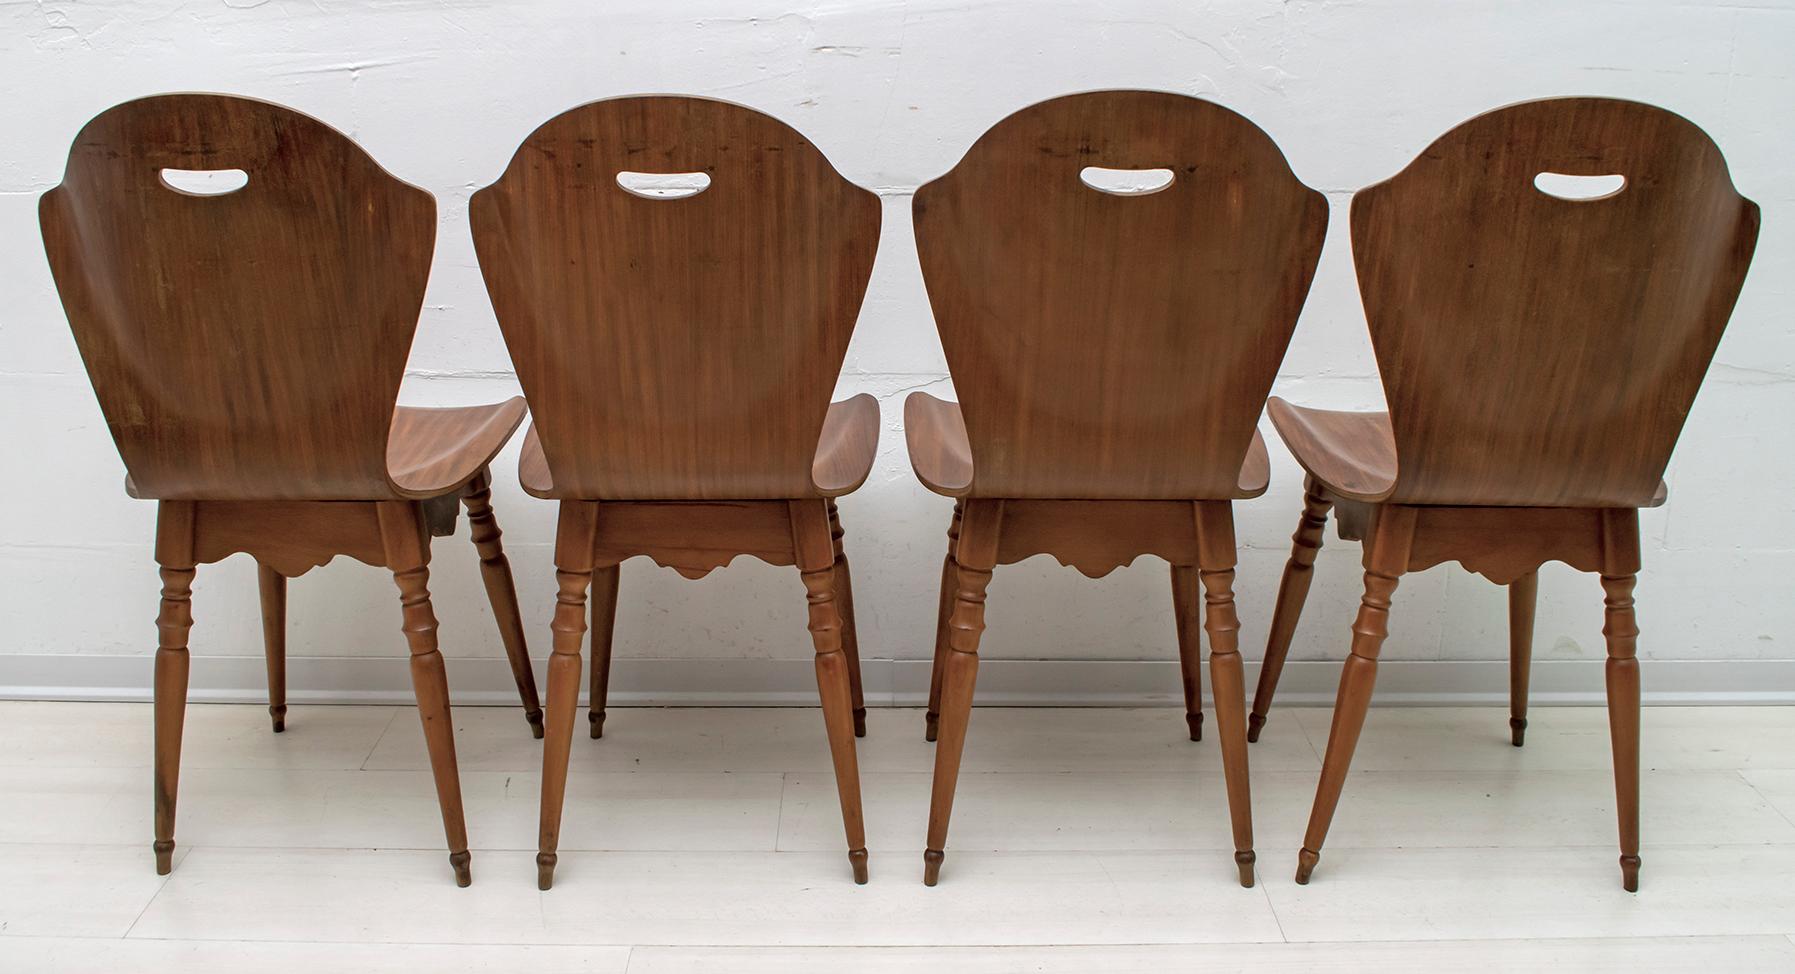 Beech After Carlo Ratti Mid-Century Modern Italian Bentwood Chairs, 1950s For Sale